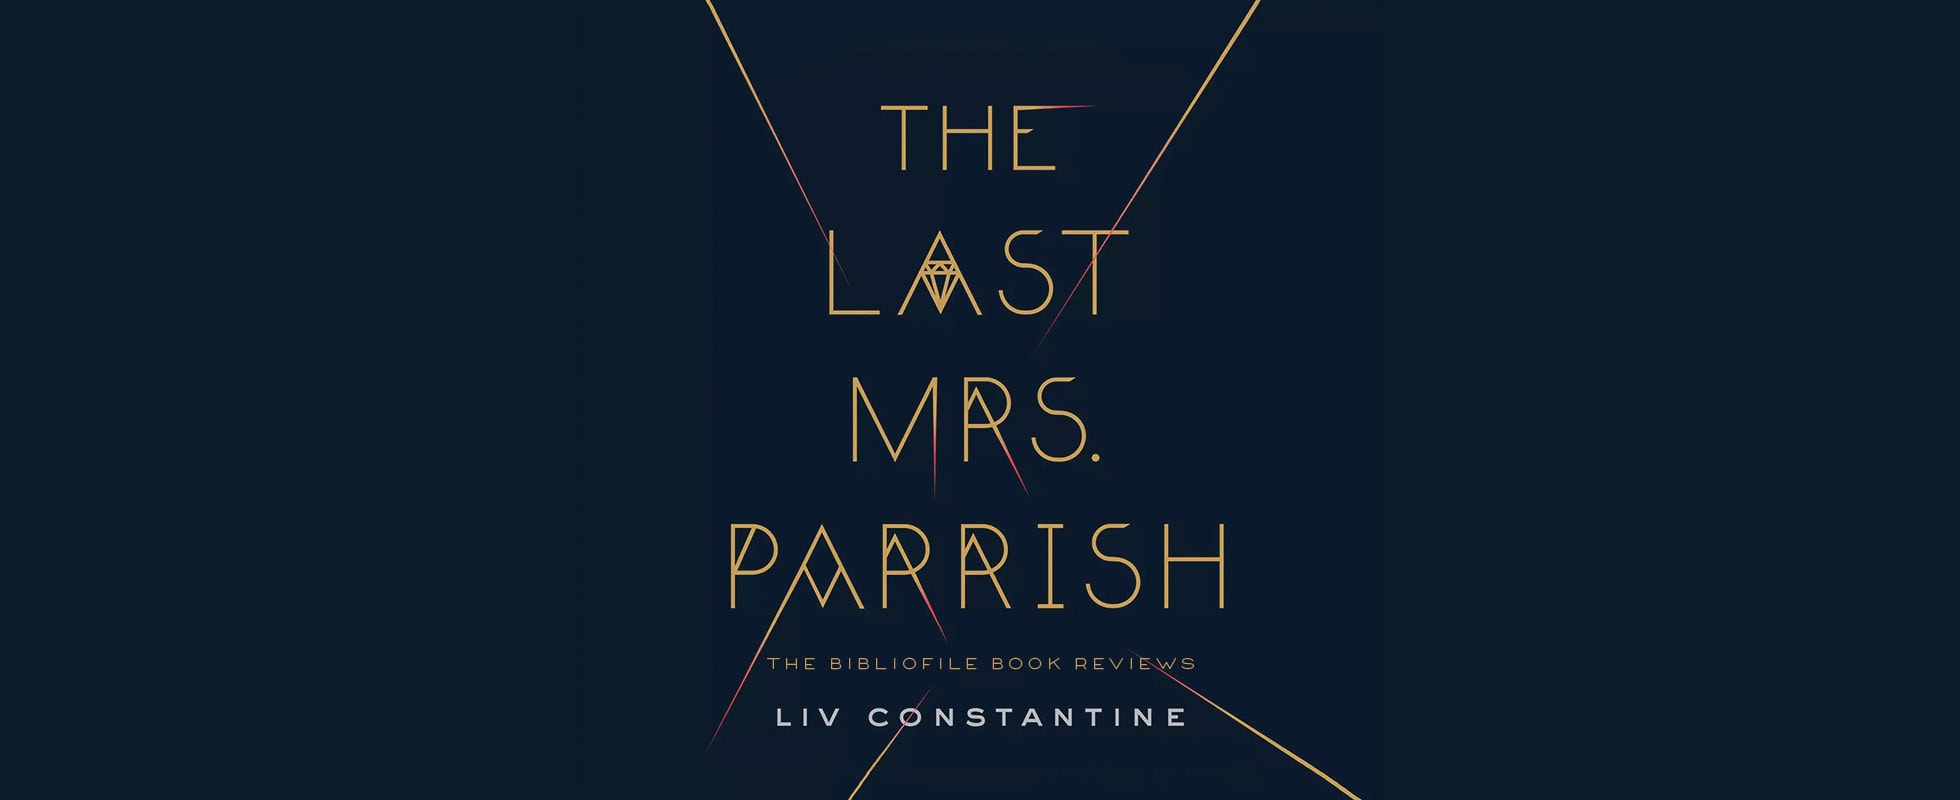 The Last Mrs. Parrish by Liv Constantine book review plot summary synopsis recap discussion spoilers endling explanations